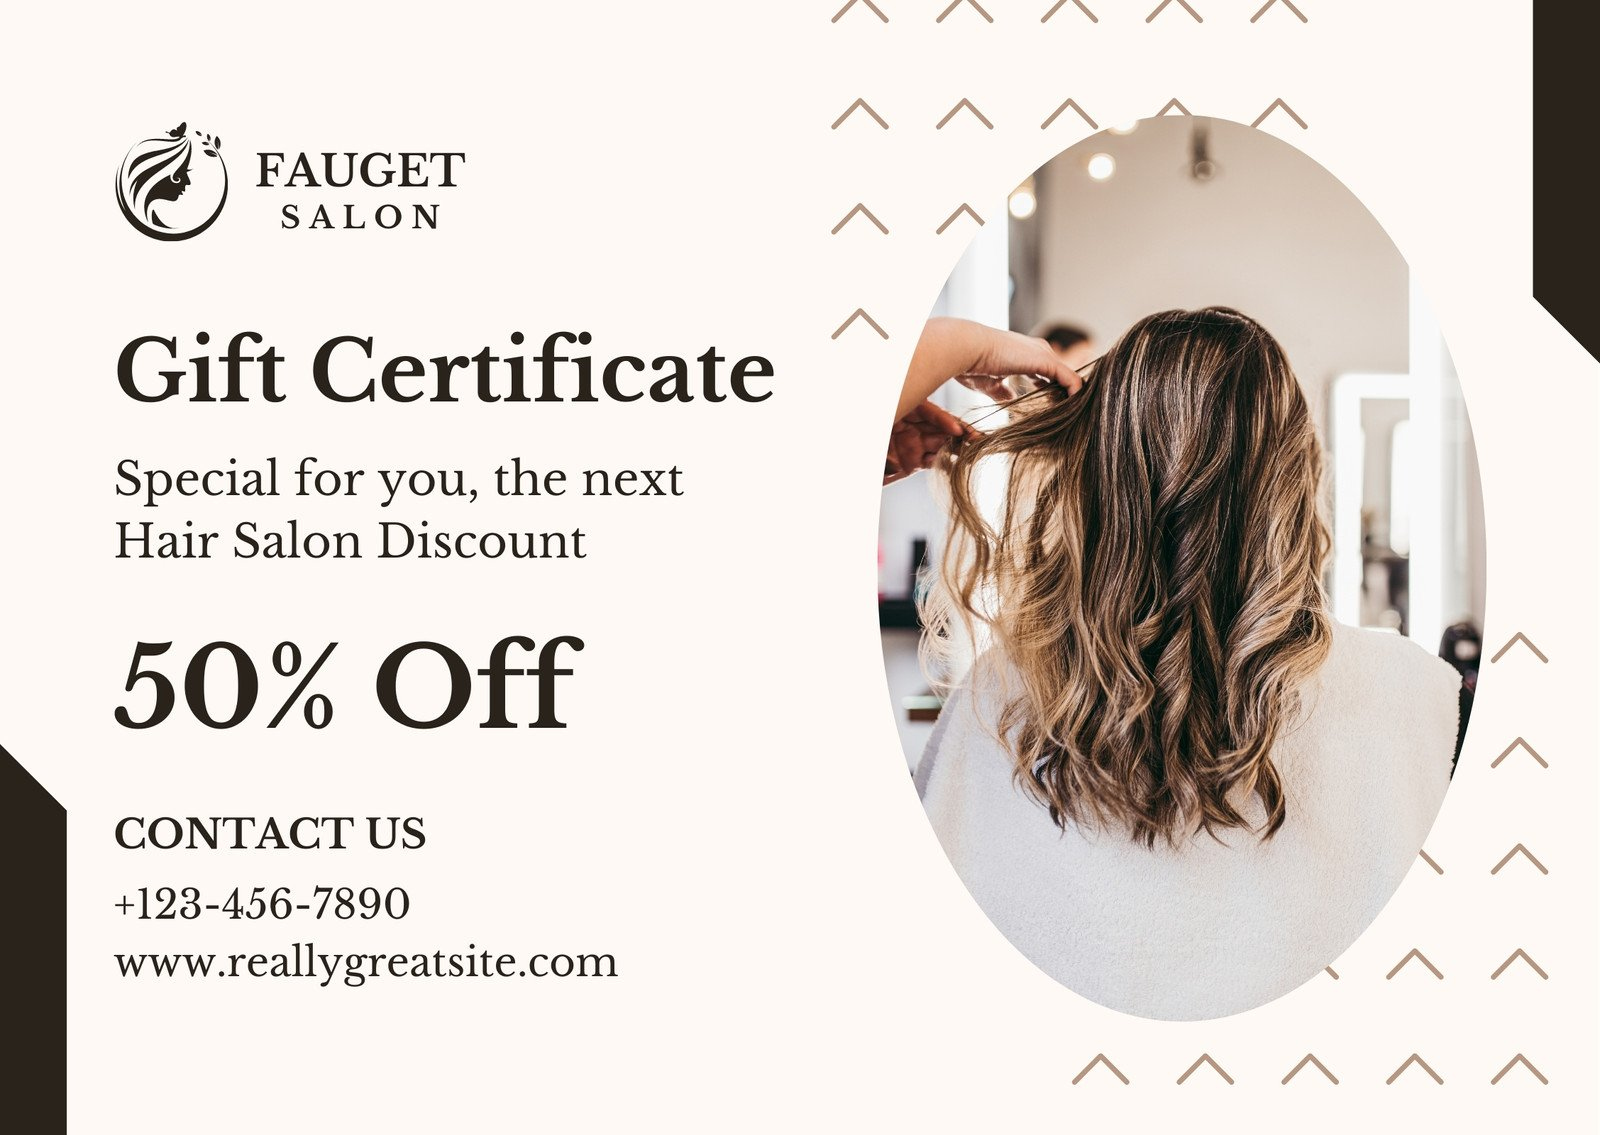 Free, Custom Printable Hair Salon Gift Certificate Templates | Canva with regard to Free Printable Gift Certificates For Hair Salon